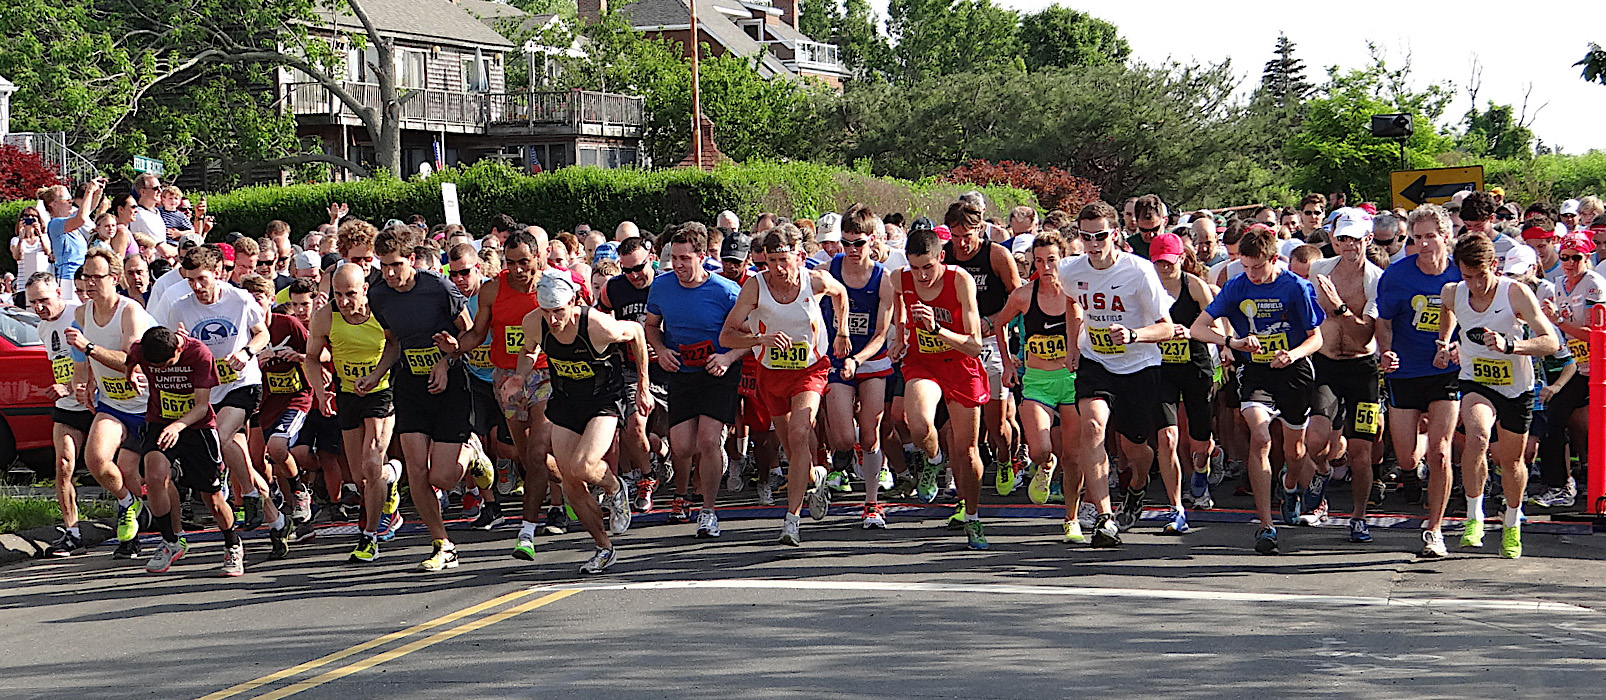 Fairfield hits the streets for 5K prelude to halfmarathon